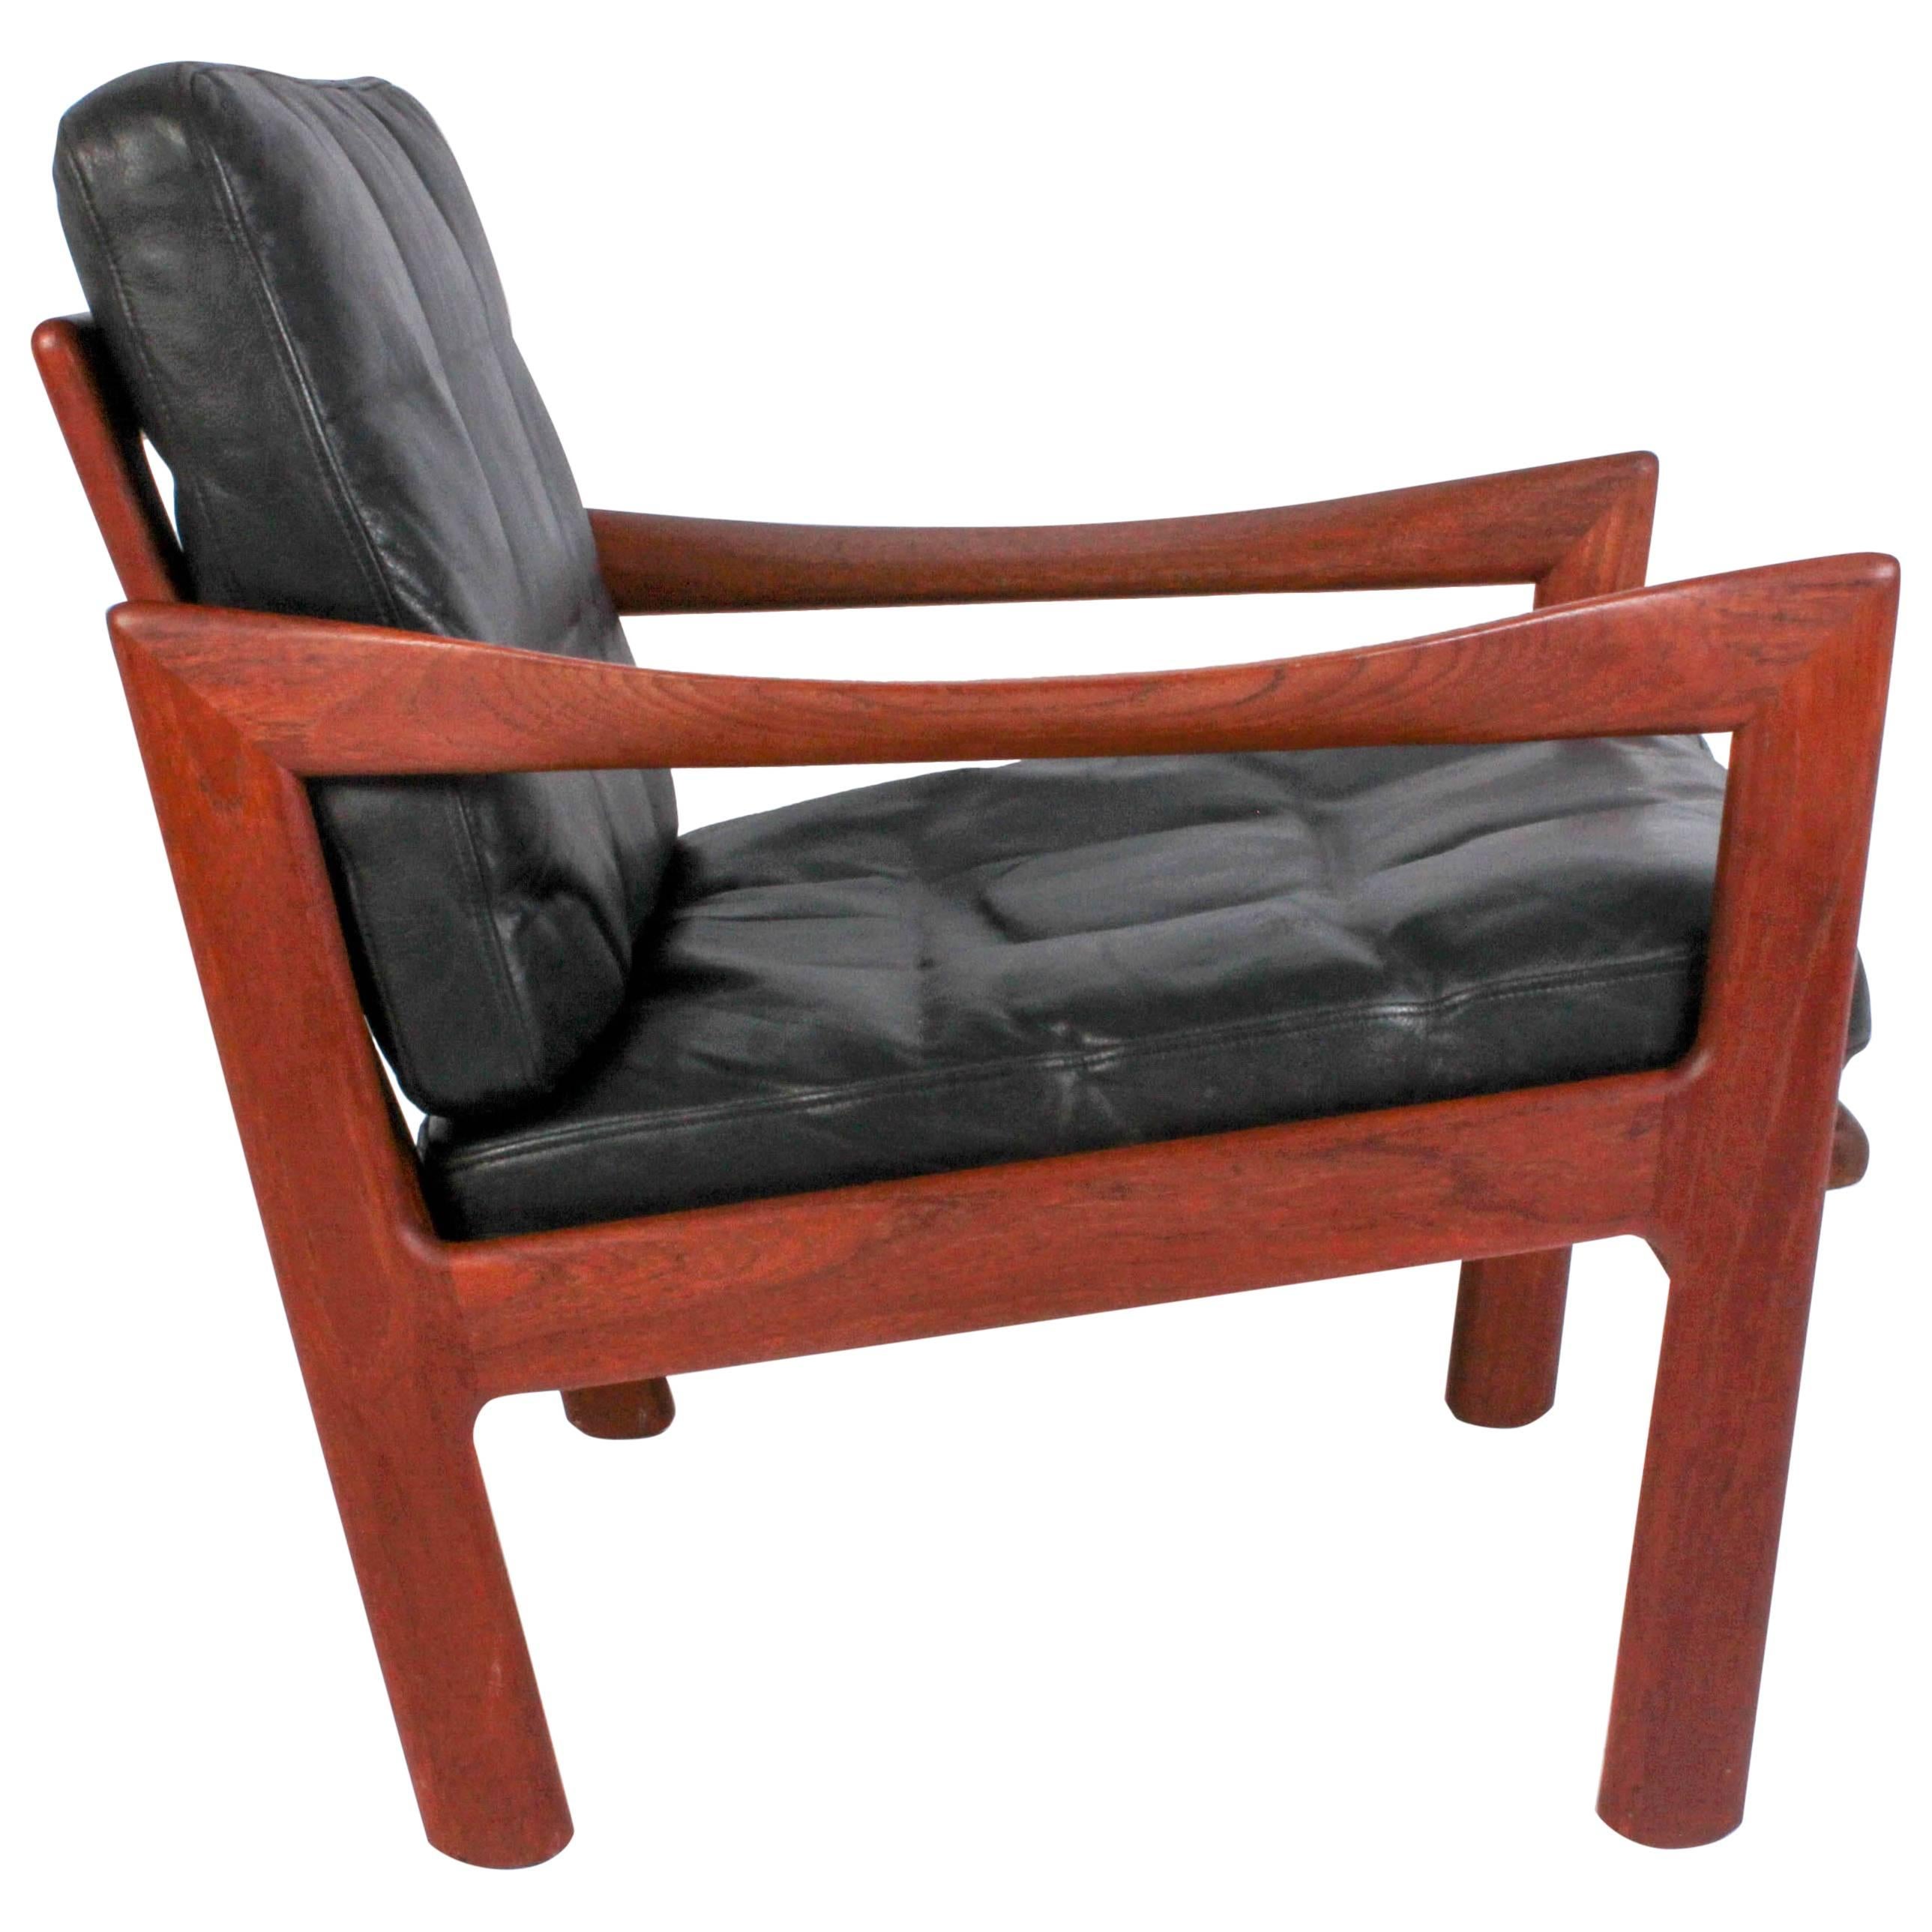 Illum Wikkelsø Midcentury Teak and Leather Lounge Chair for Niels Eilersen For Sale